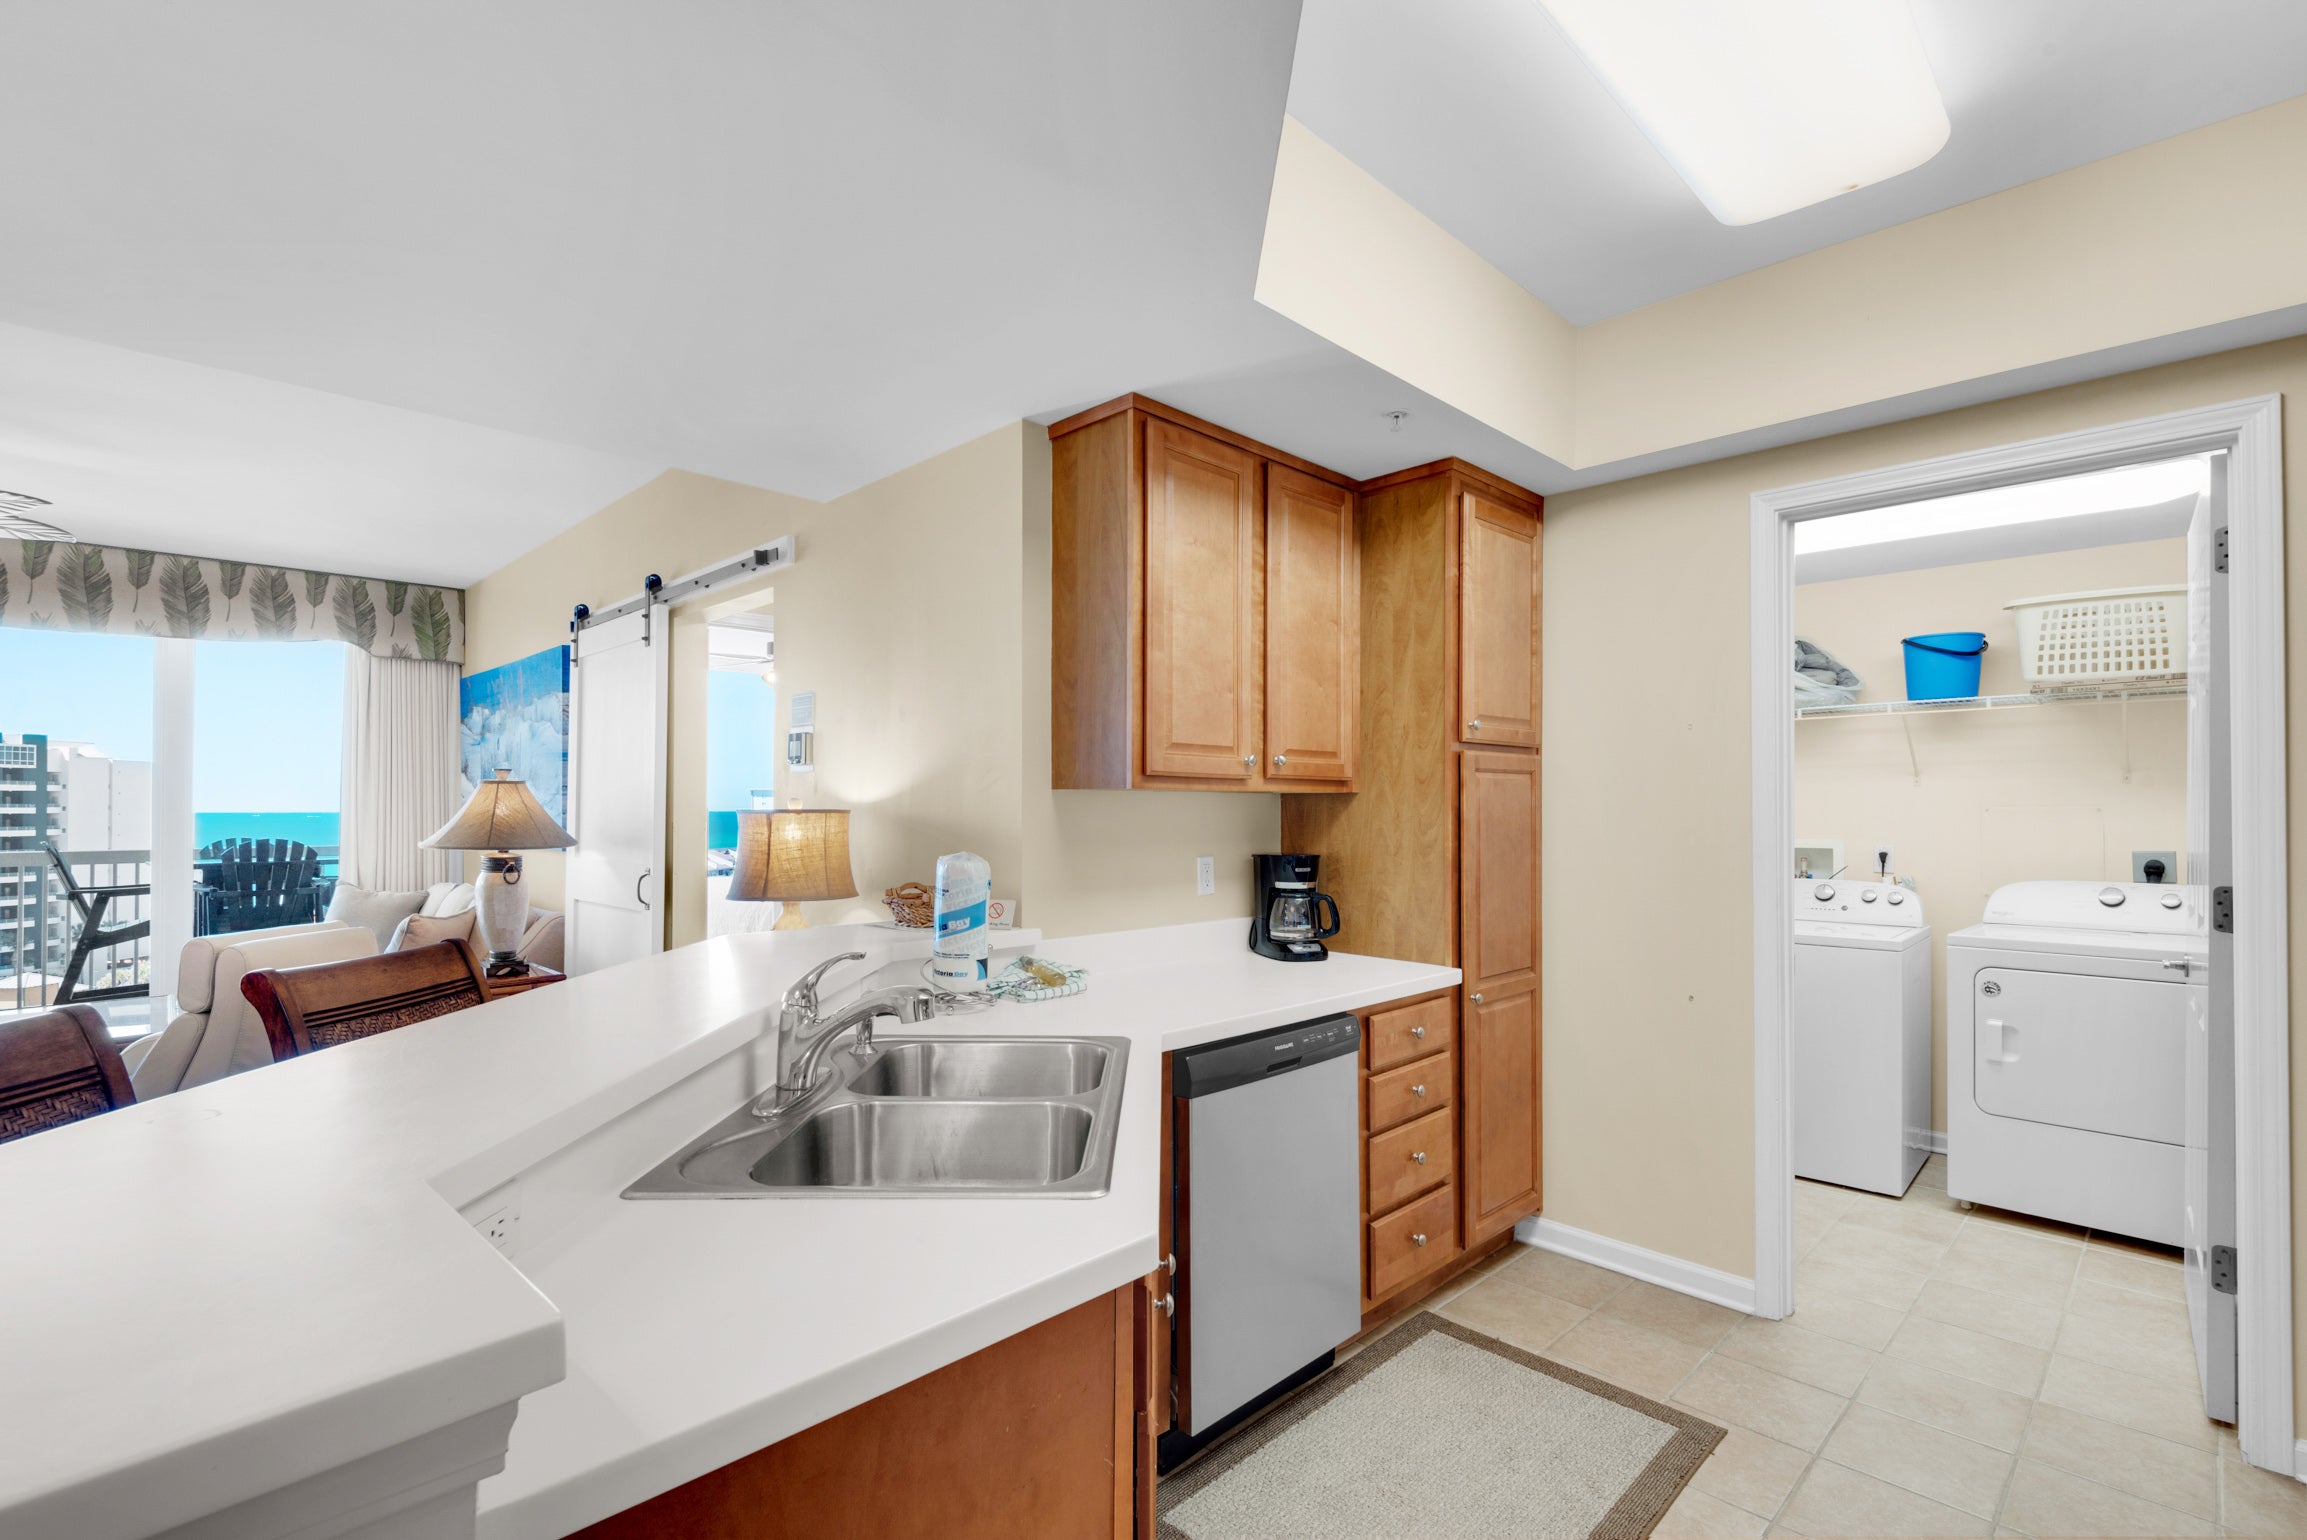 Kitchen to laundry room